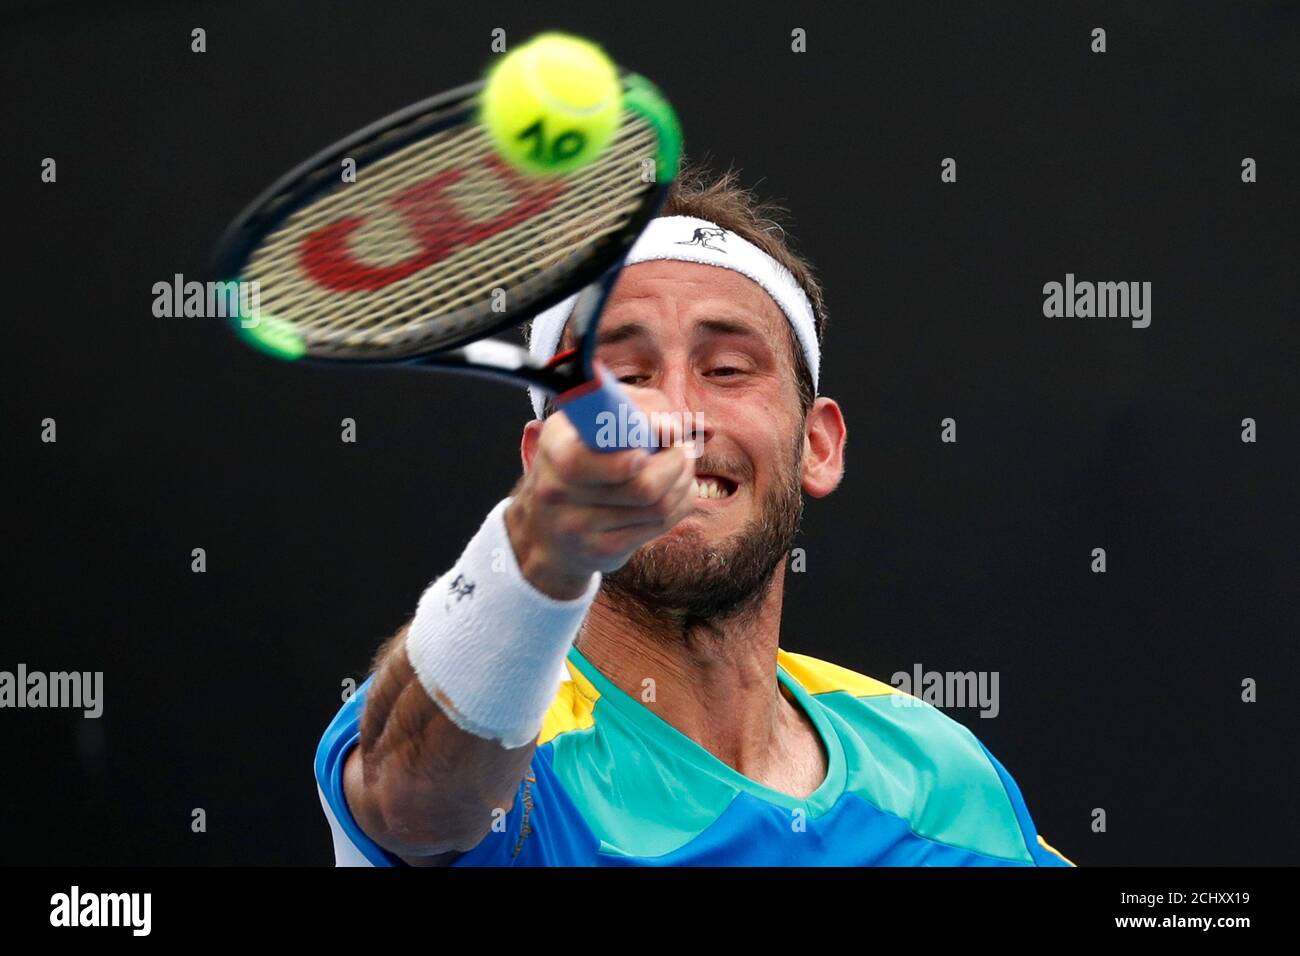 Tennis - Australian Open - First Round - Melbourne Park, Melbourne,  Australia, January 15, 2019. Italy's Luca Vanni in action during the match  against Spain's Pablo Carreno Busta. REUTERS/Aly Song Stock Photo - Alamy